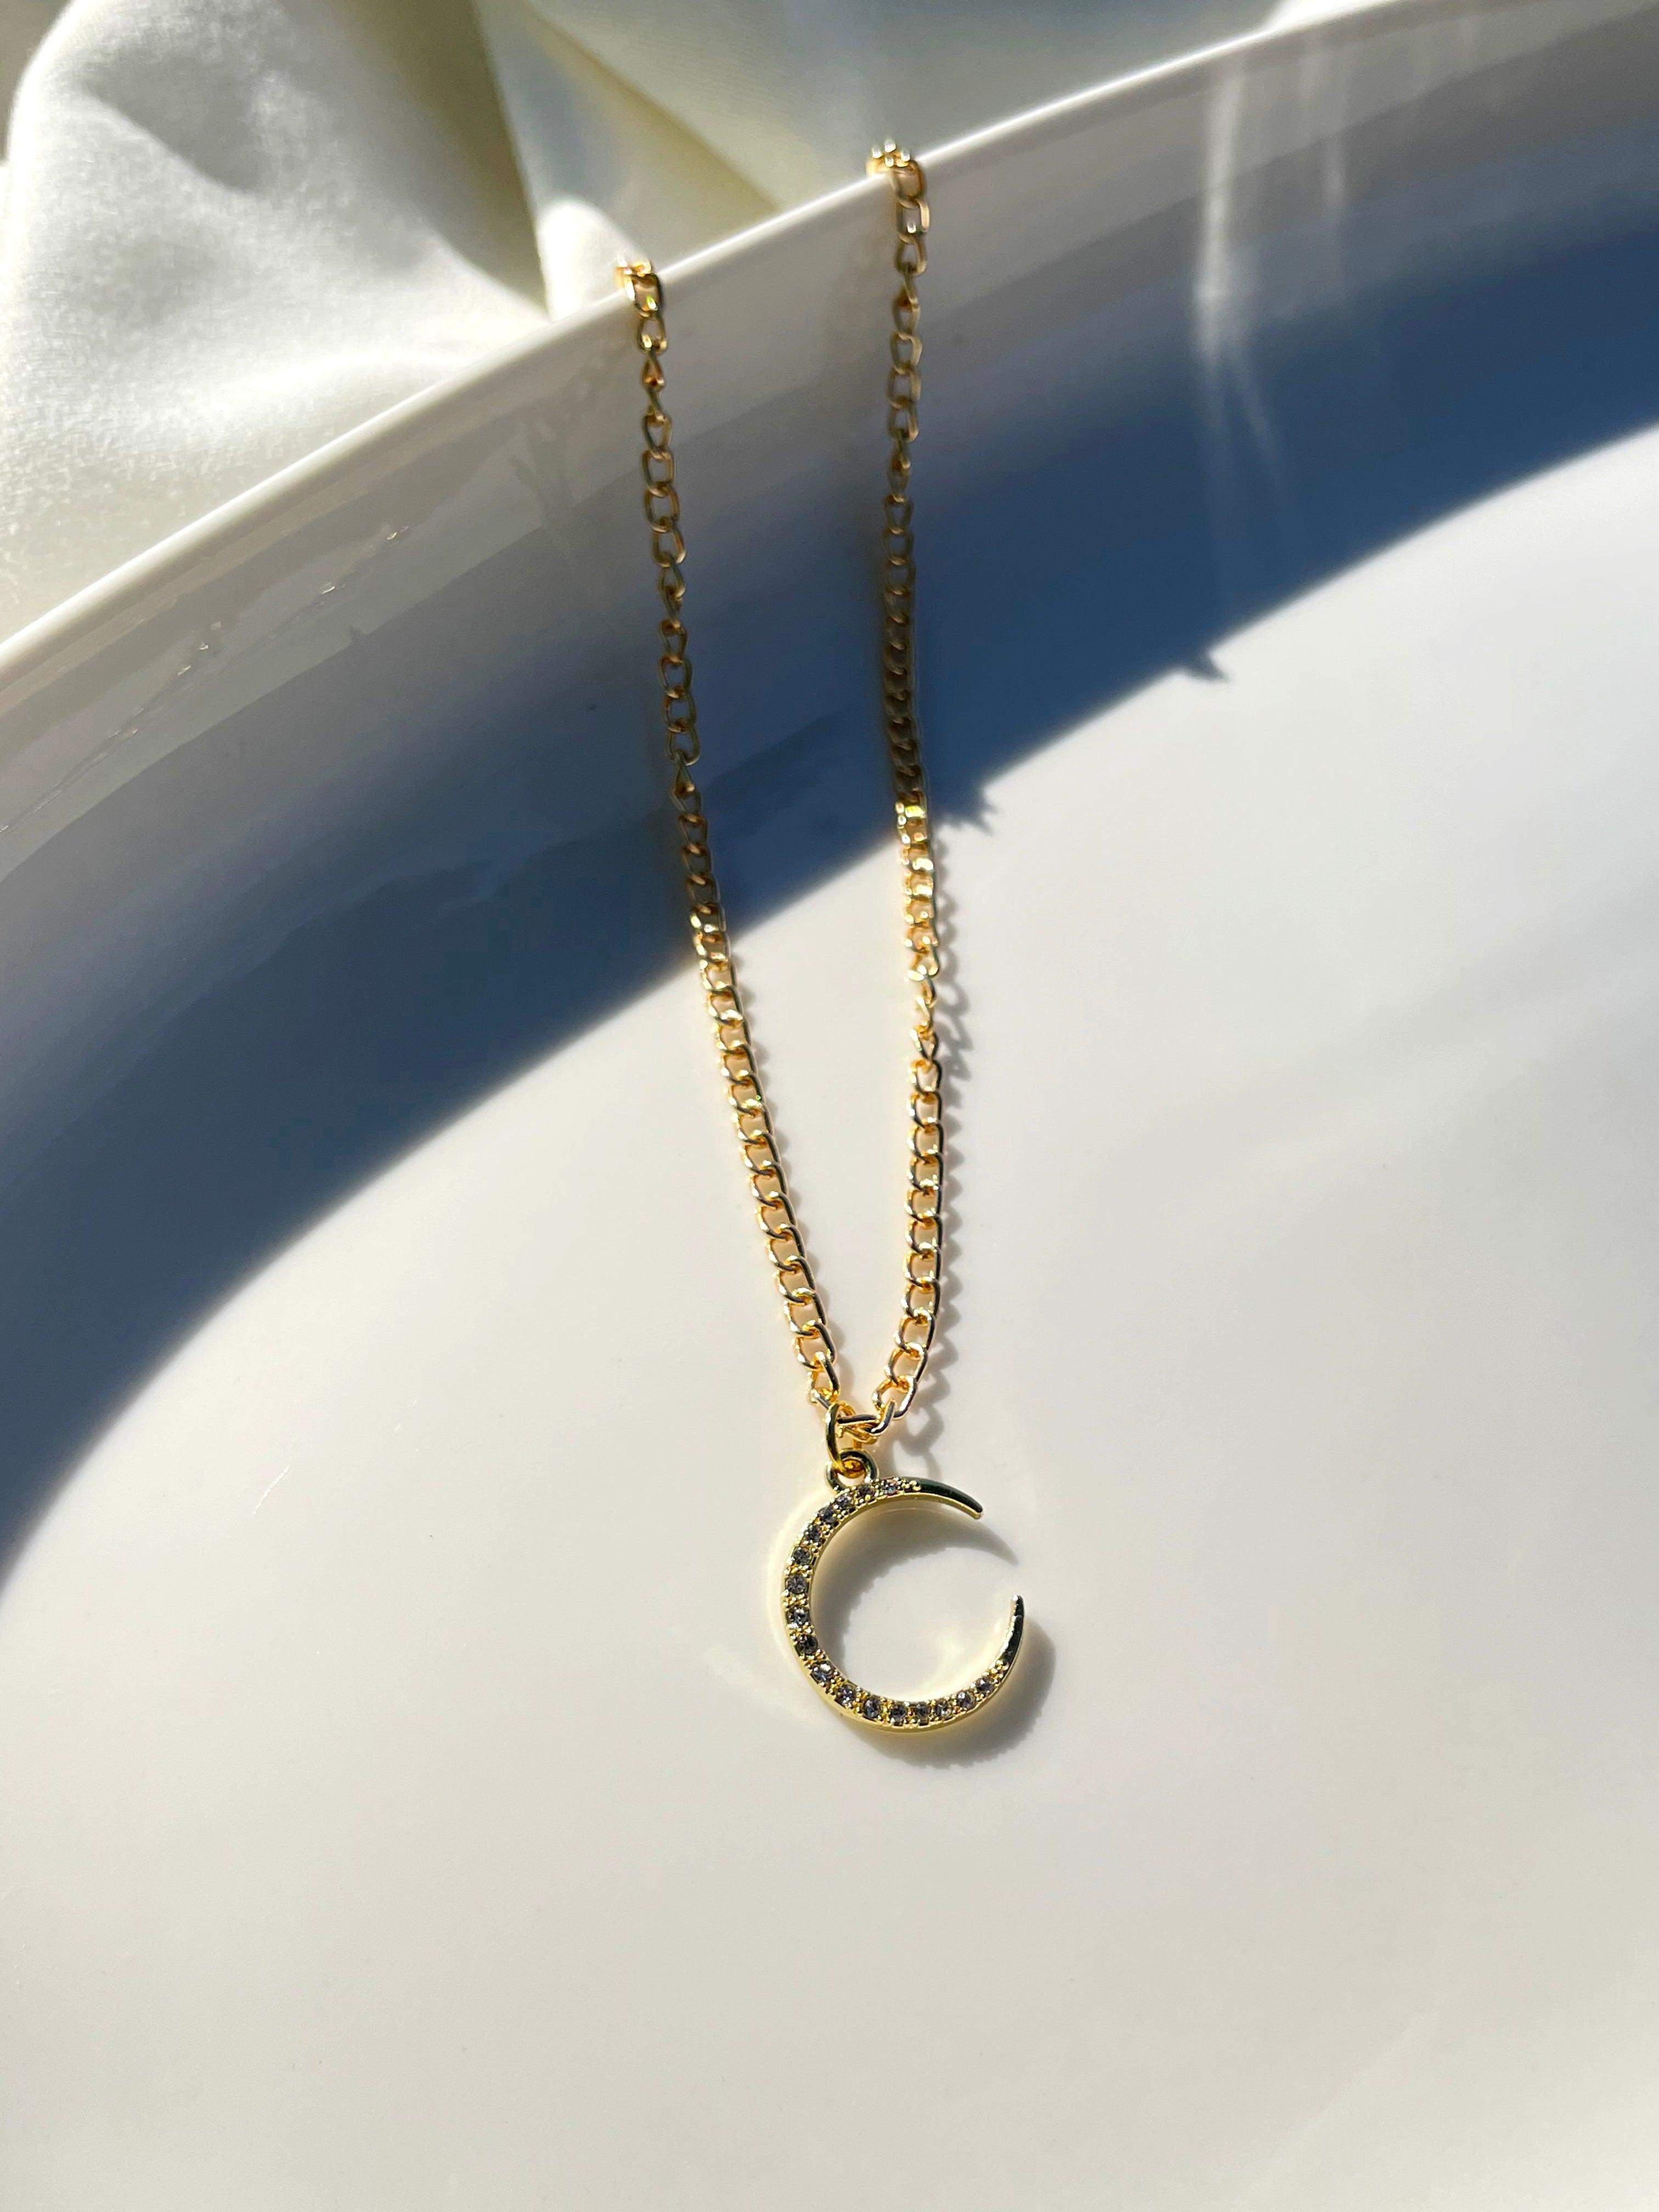 Crescent Moon Necklace Gold-Slayink-accessories,chain,chain necklace,Choker,crescent moon necklace,Gold chain,Gold necklace,jewellery,moon pendant,necklace,necklaces,pendant